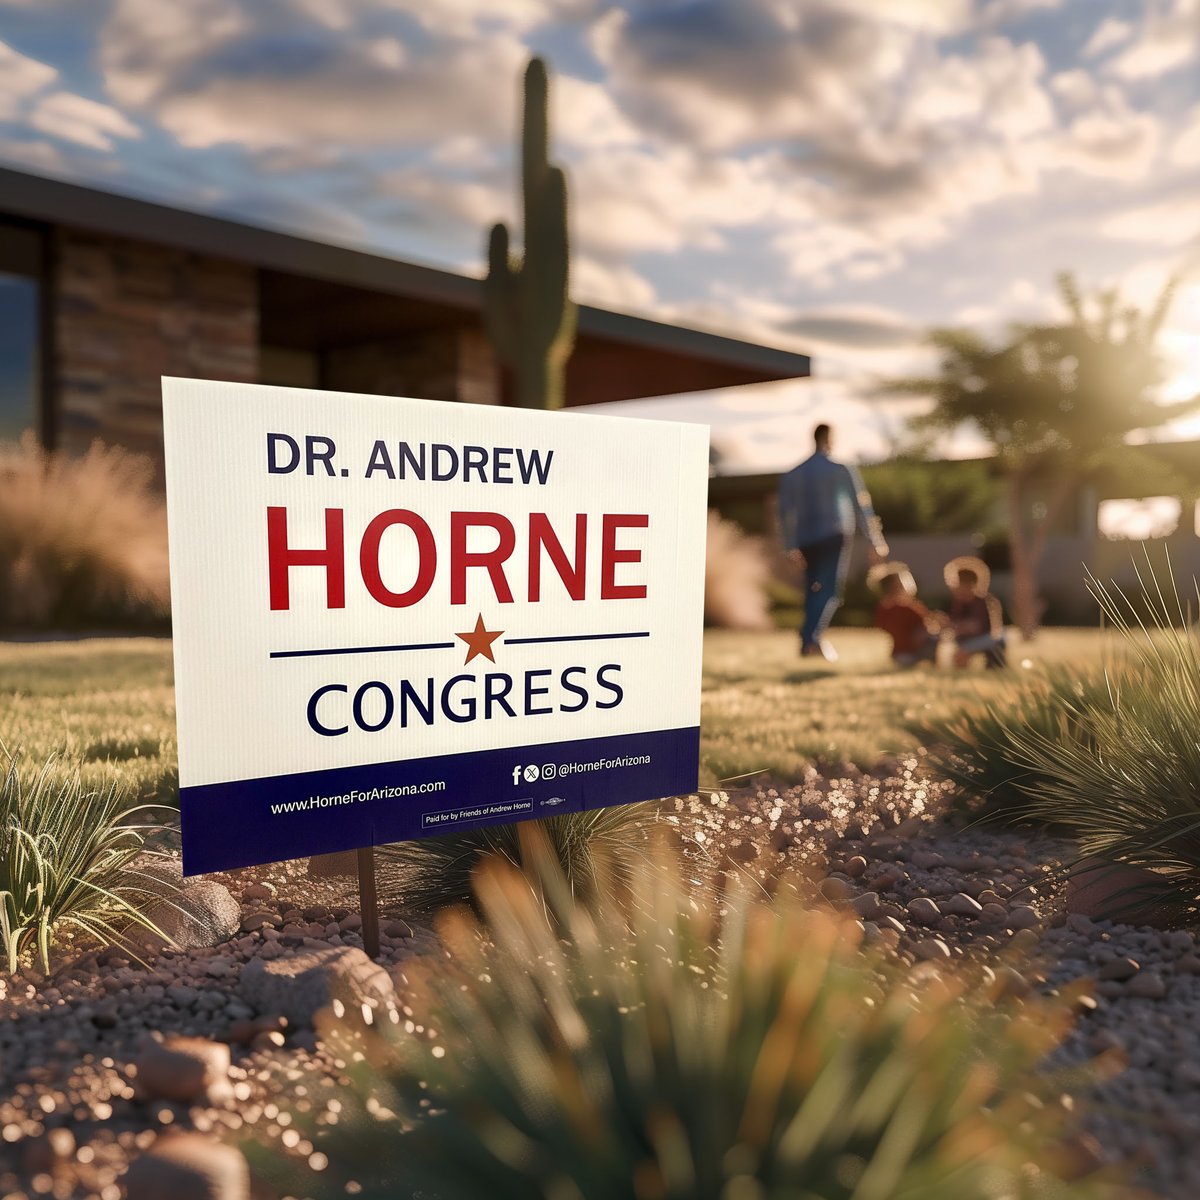 Over 5,000 people like you have nominated me to be their representative, we are well on our way to removing David Schweikert. Do you want a sign in your yard to help make a difference? We will come put it up ASAP! (Still delivering over 300 from last weekend!) THANK YOU! #AZ01